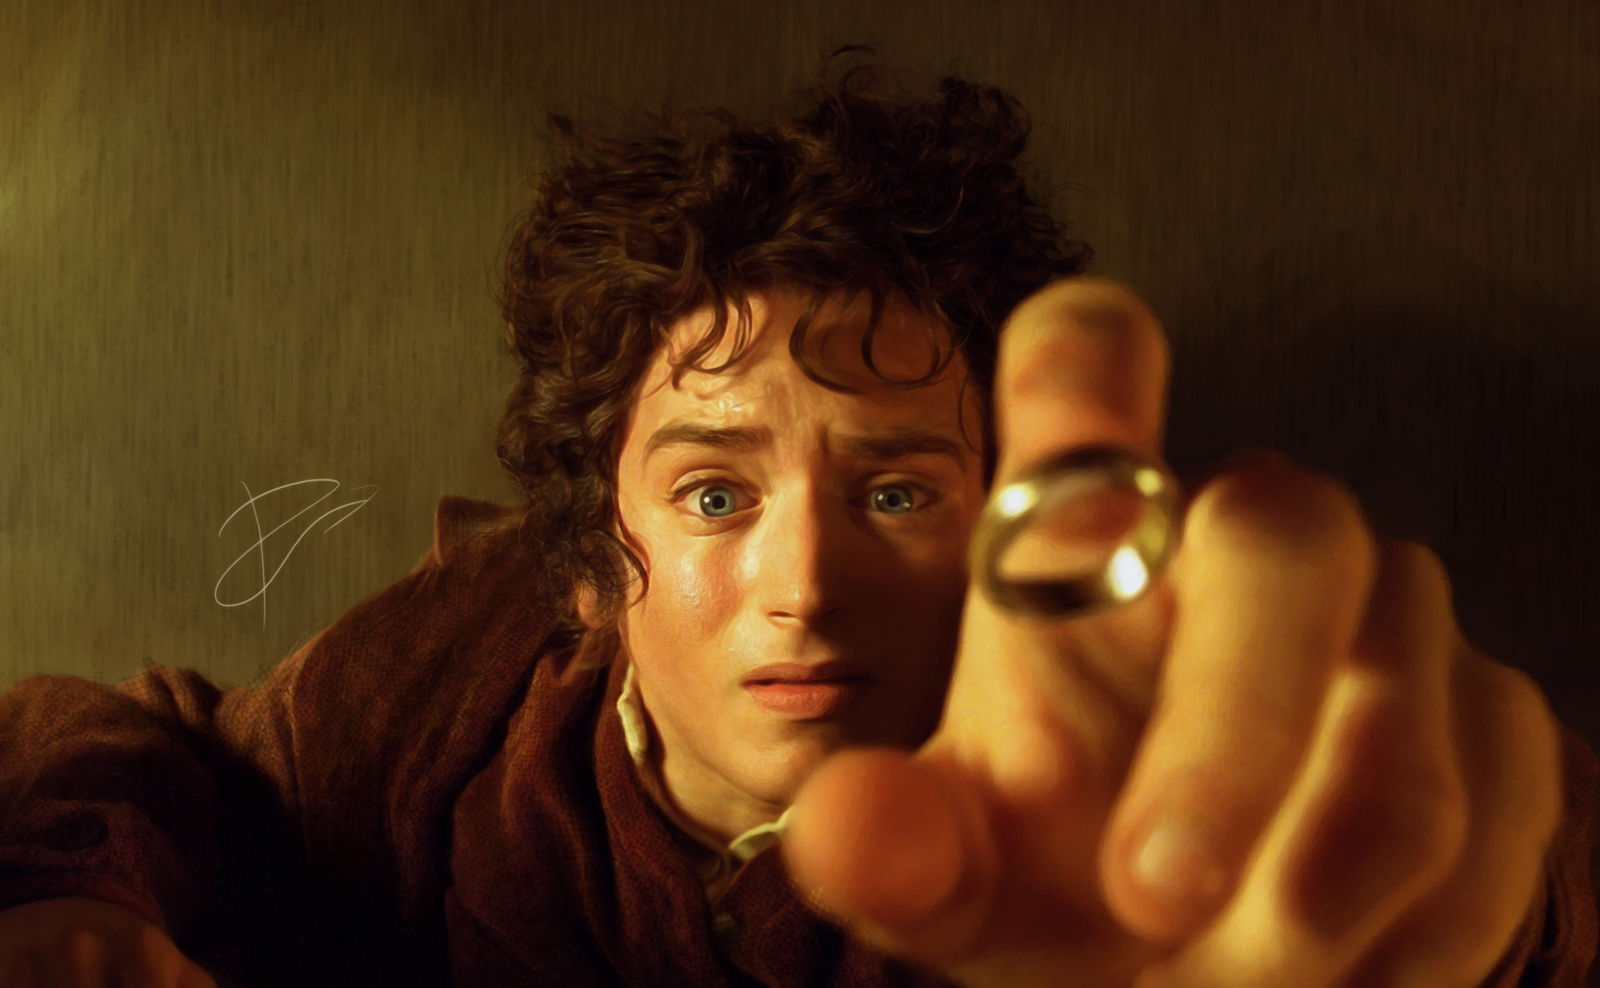 Frodo Baggins - The Lord of The Rings by RafaelGiovannini on DeviantArt